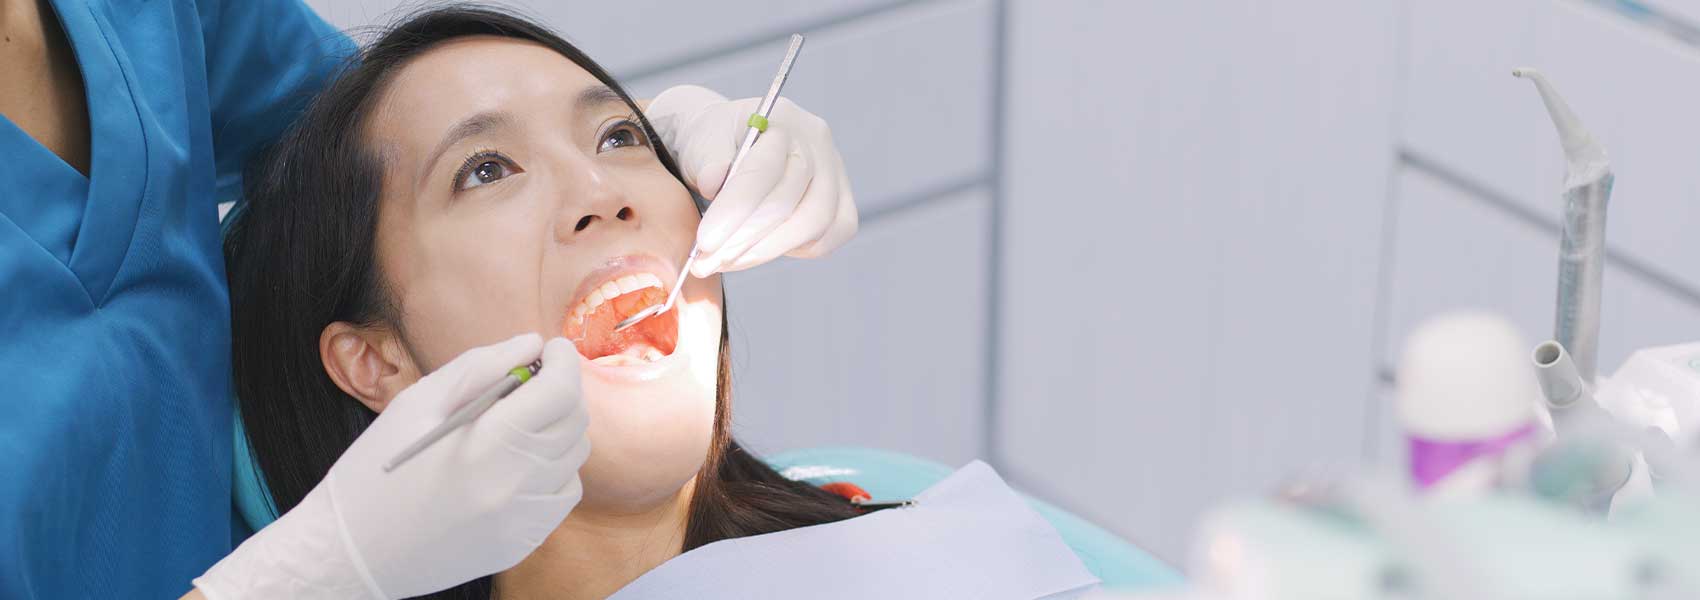 Dentist perform treatments for root canal planing